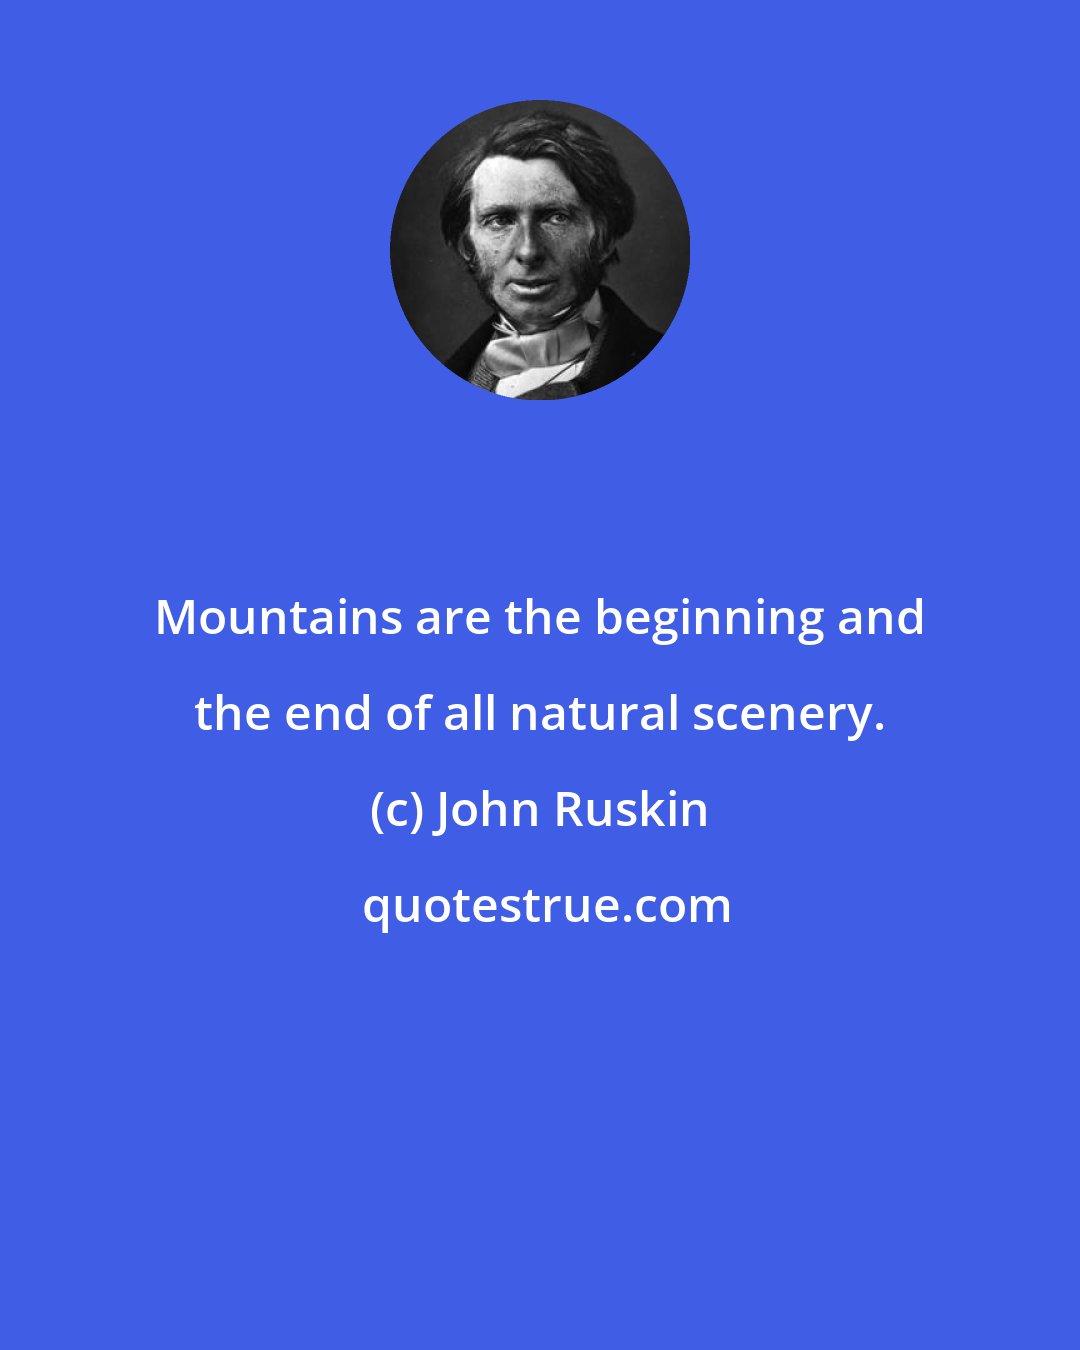 John Ruskin: Mountains are the beginning and the end of all natural scenery.